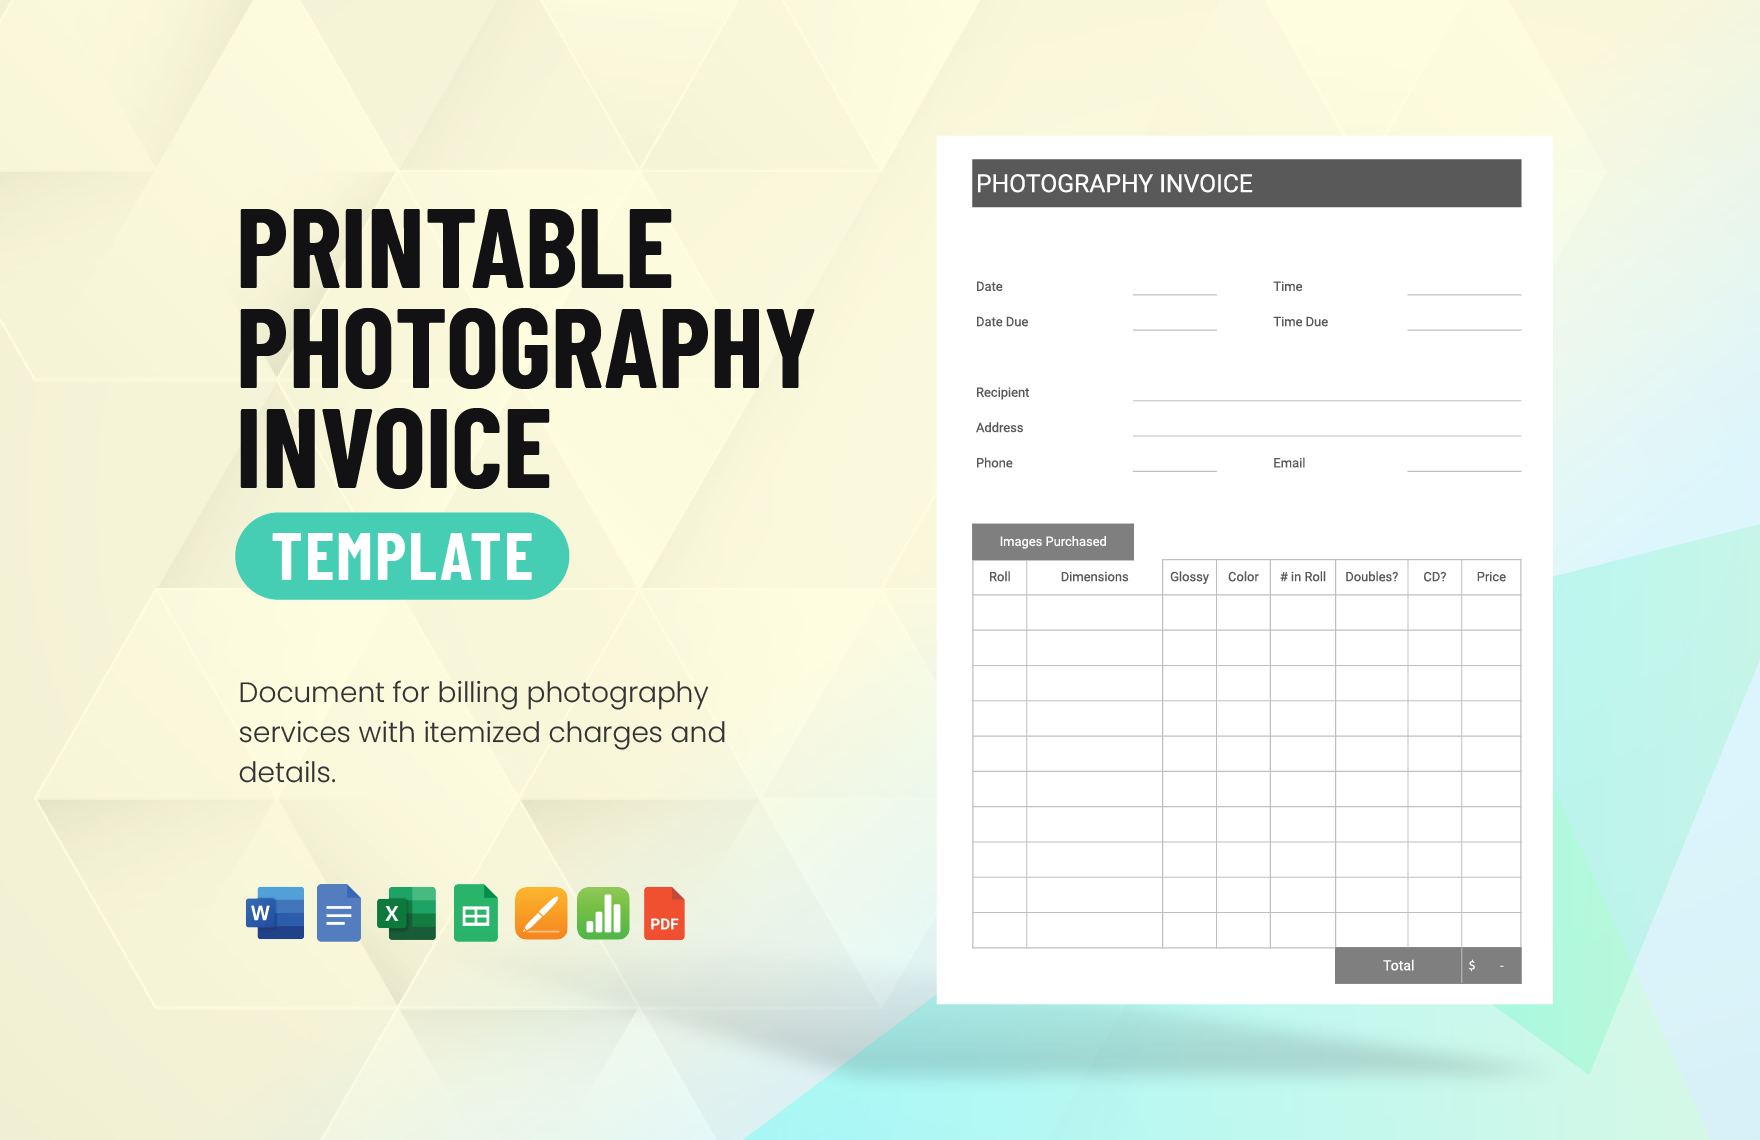 Printable Photography Invoice Template in Word, Google Docs, Excel, PDF, Google Sheets, Apple Pages, Apple Numbers